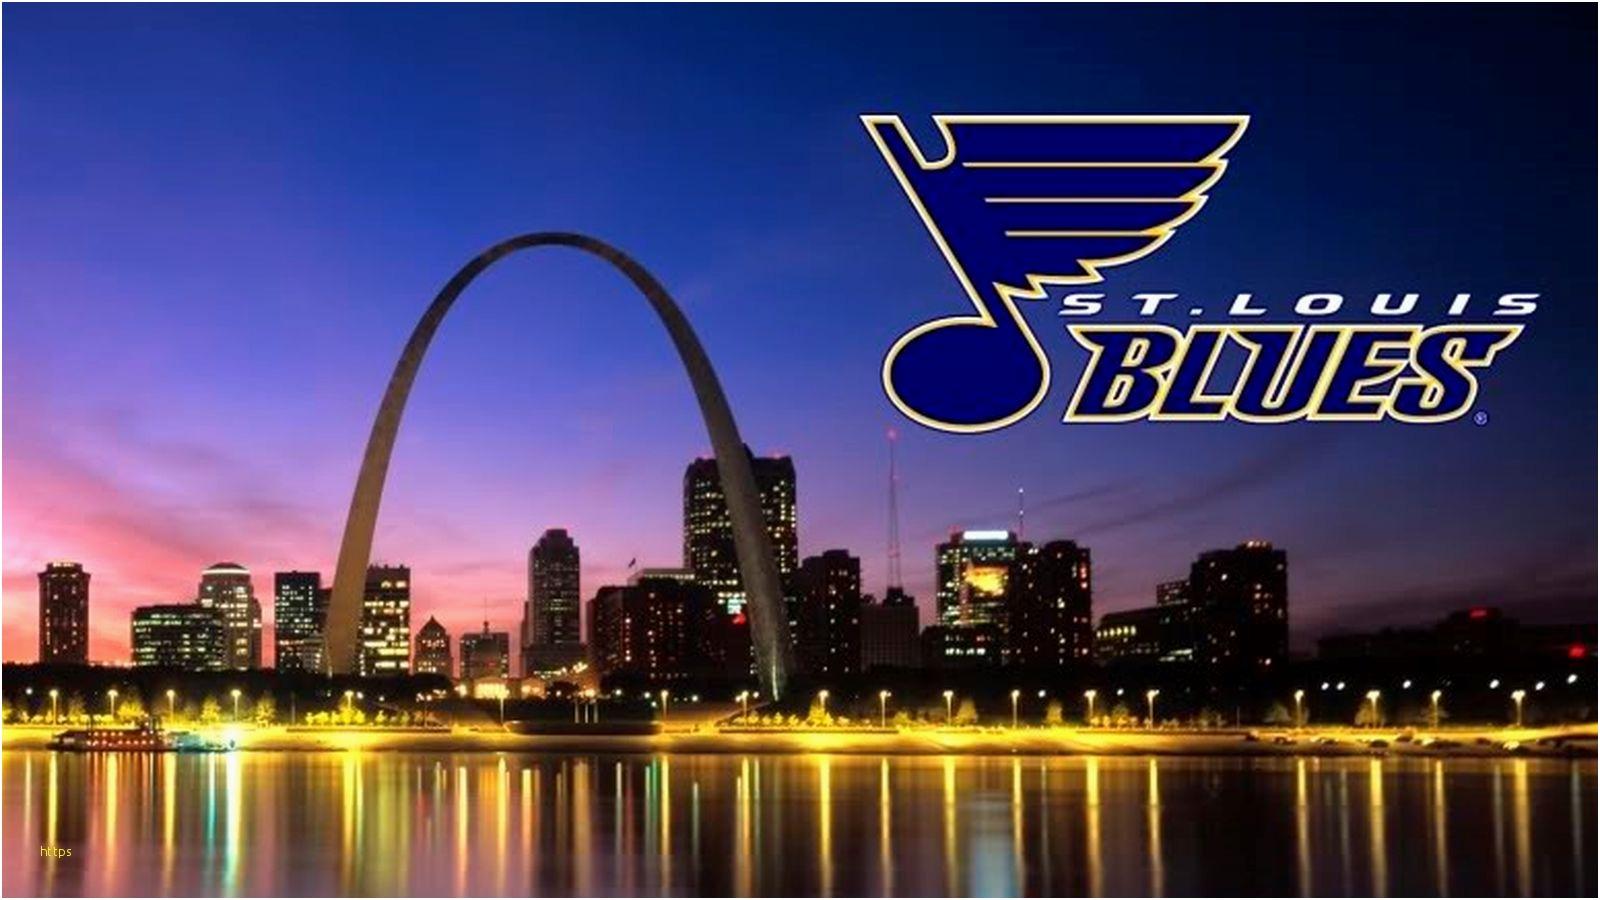 10+ St. louis Blues HD Wallpapers and Backgrounds